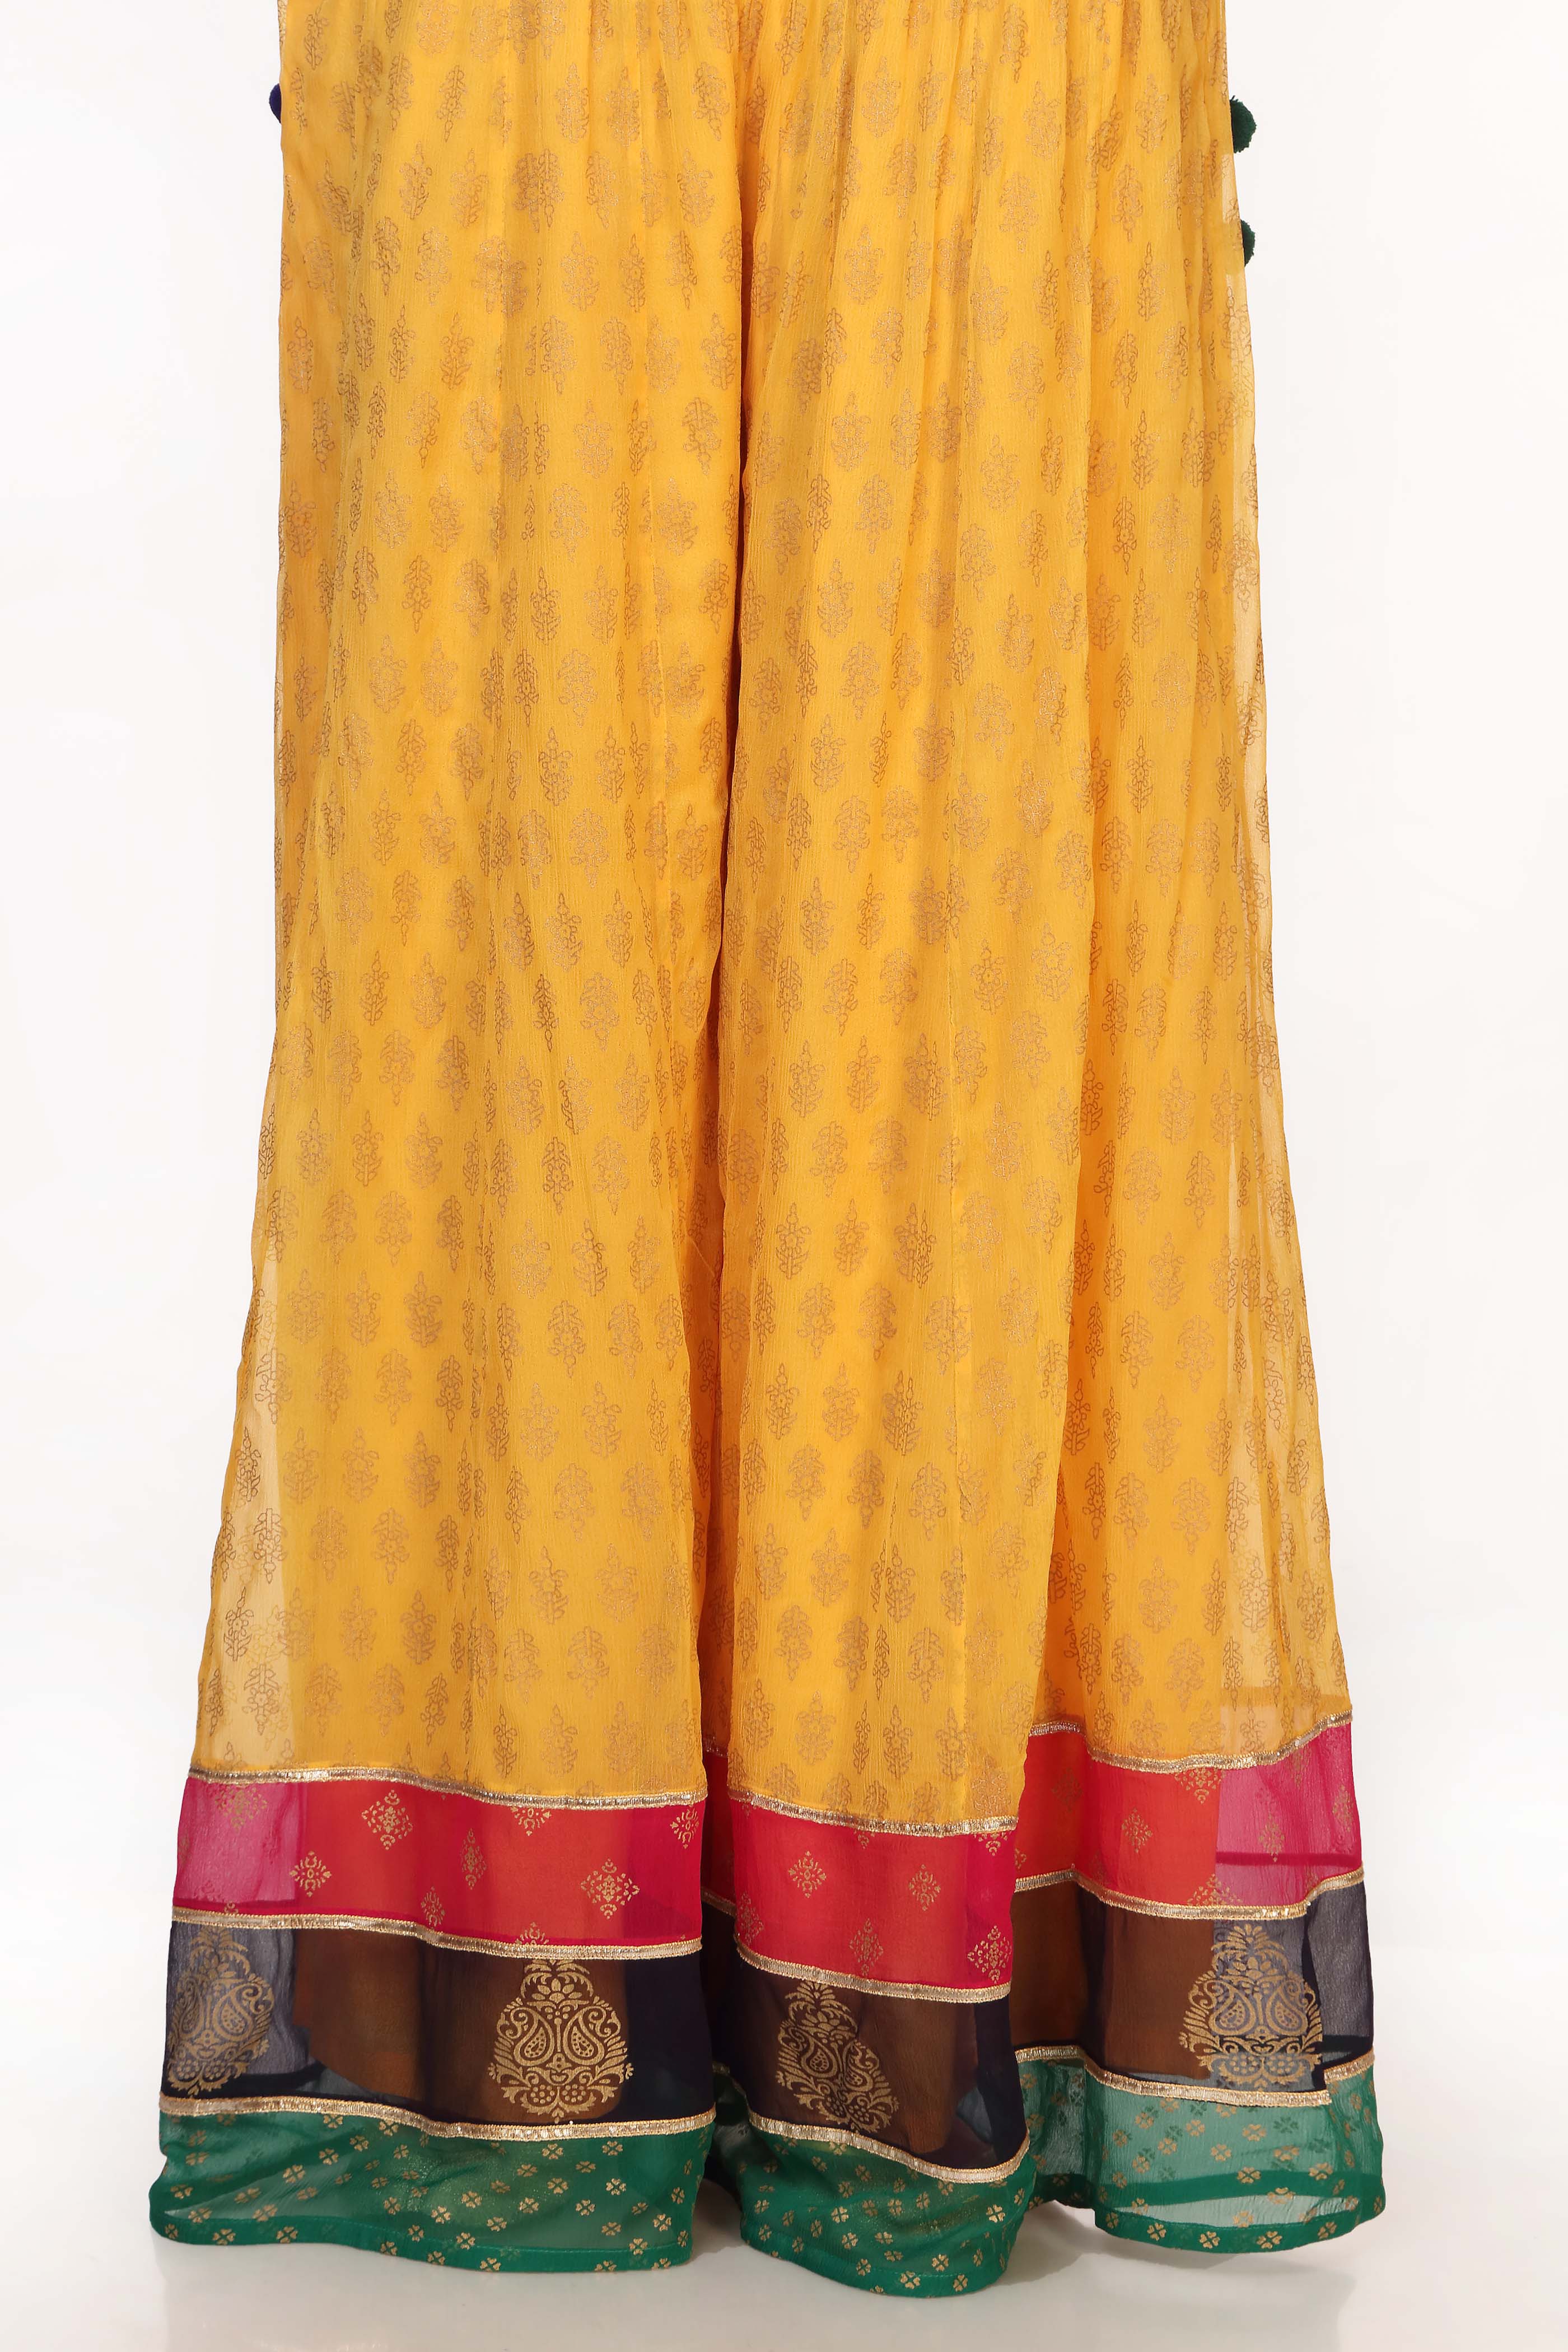 Multi Hues 1 in Yellow coloured Printed Lawn fabric